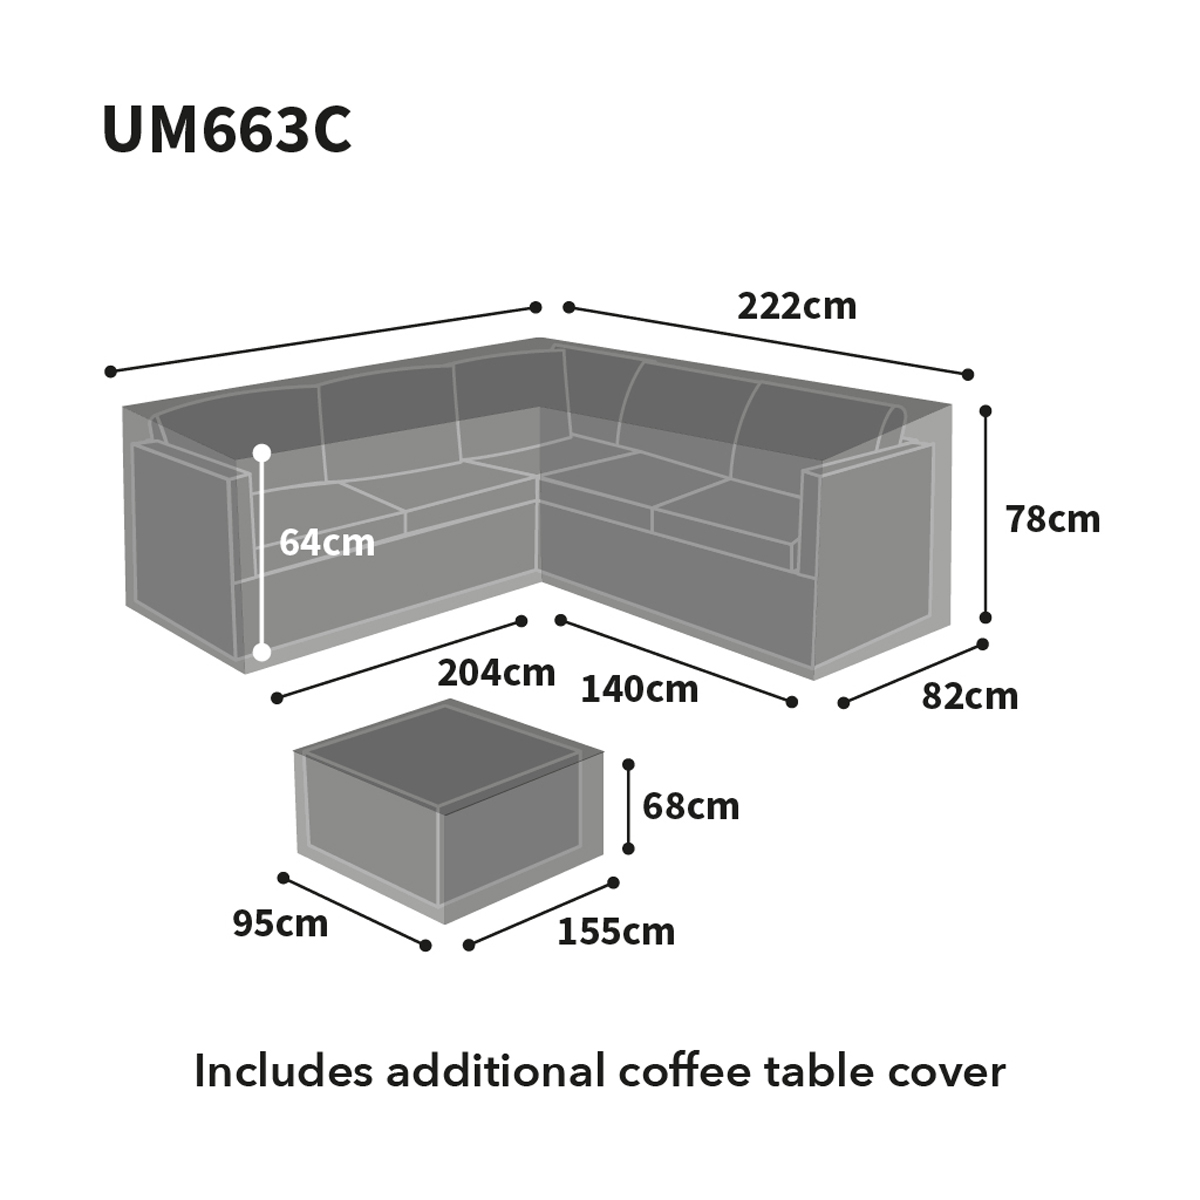 Bosmere Ultimate Large L-Shaped Left Hand Sofa Cover Size Guide